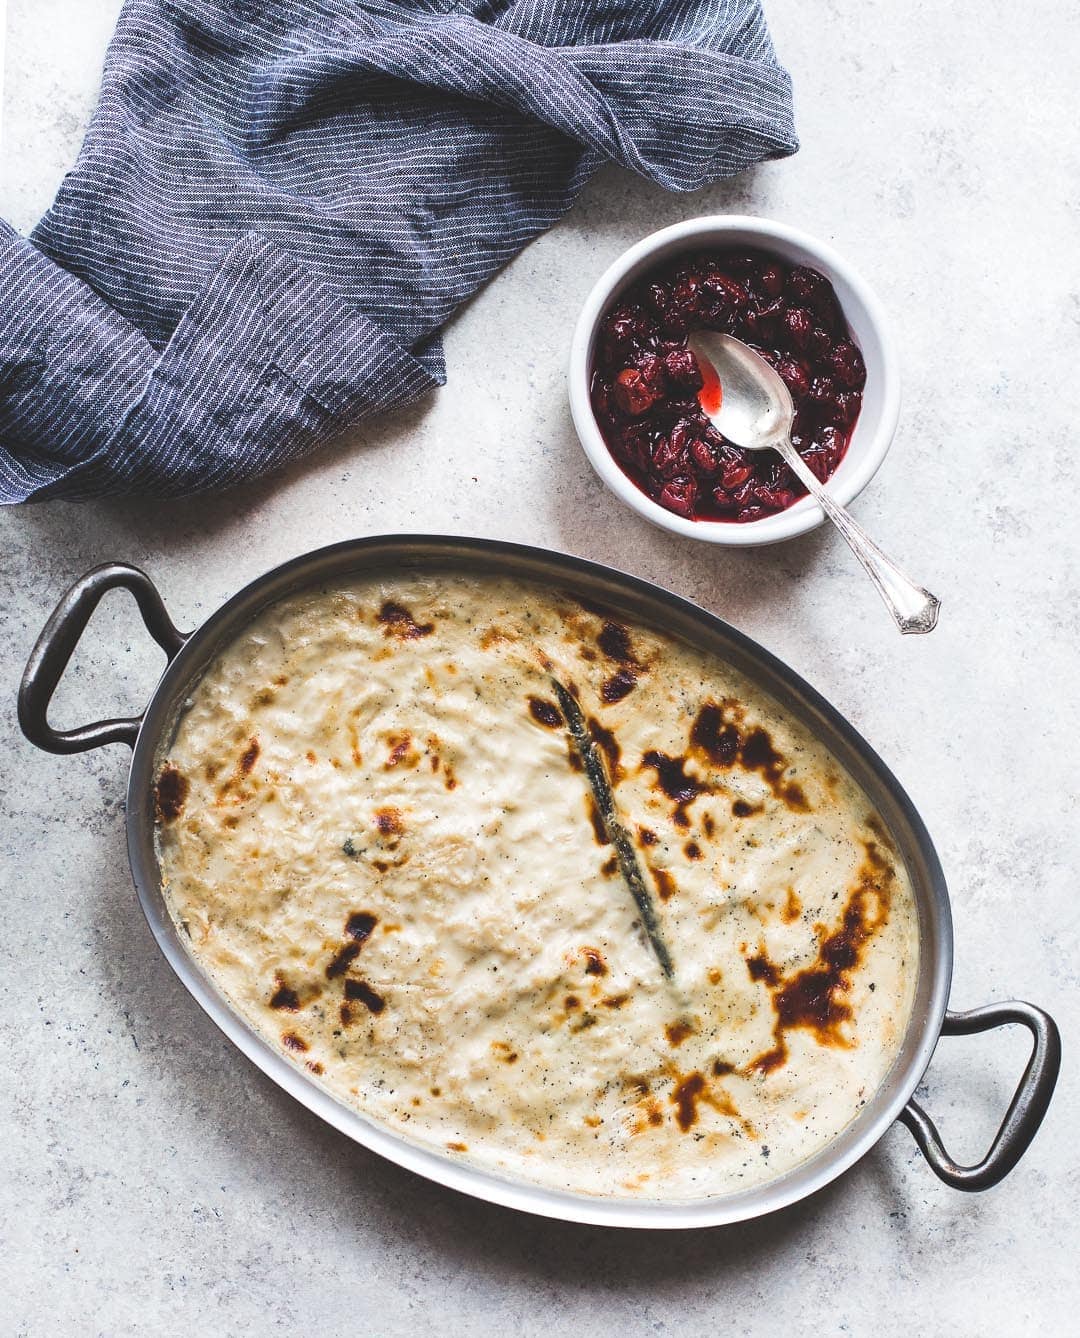 Effortless Vanilla Bean Rice Pudding with Saucy Tart Cherries {baked, so all hands off! so creamy, can be served warm or cold}